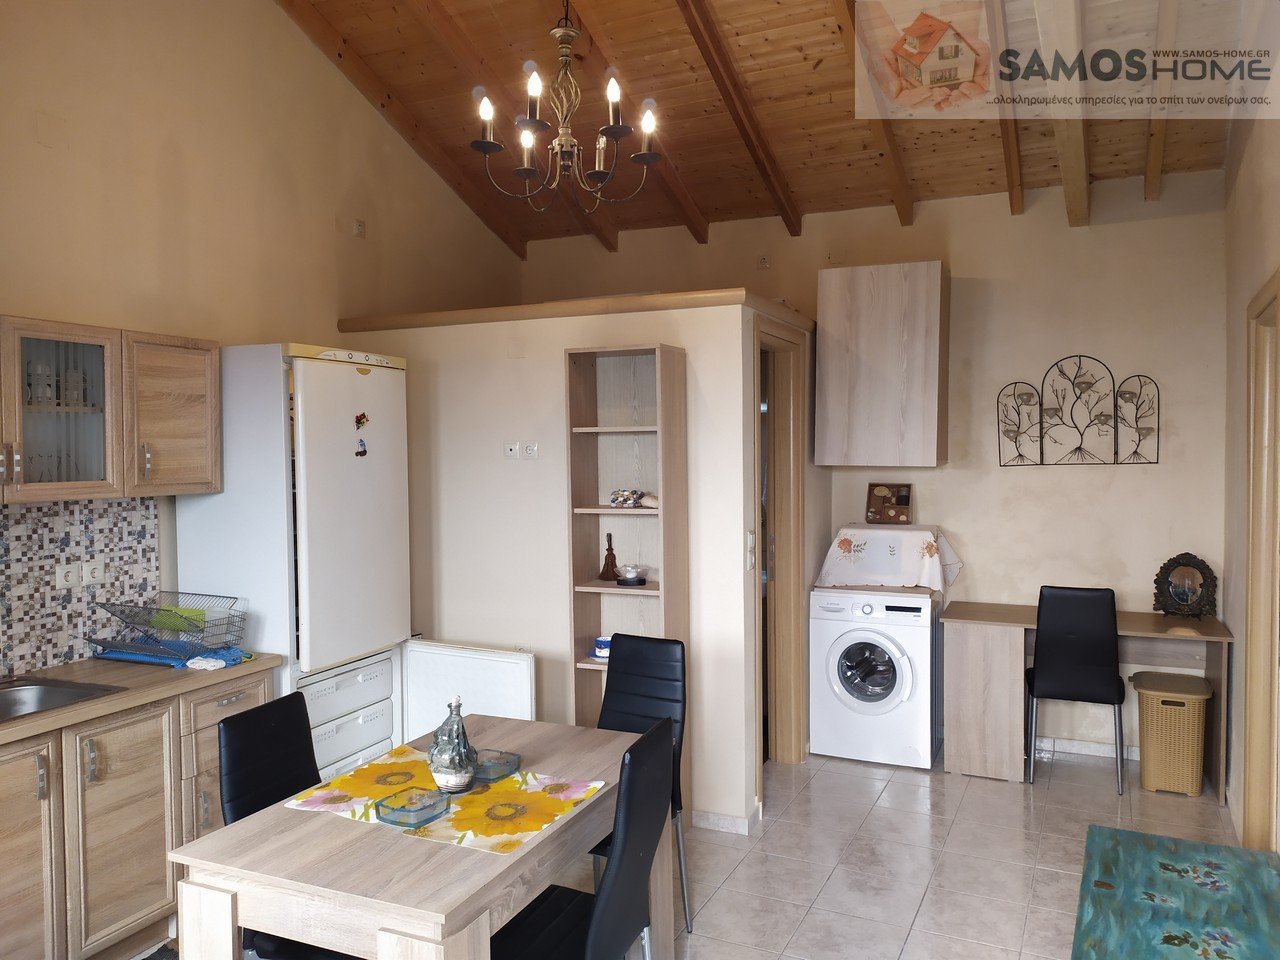 detached house For rent - Samos